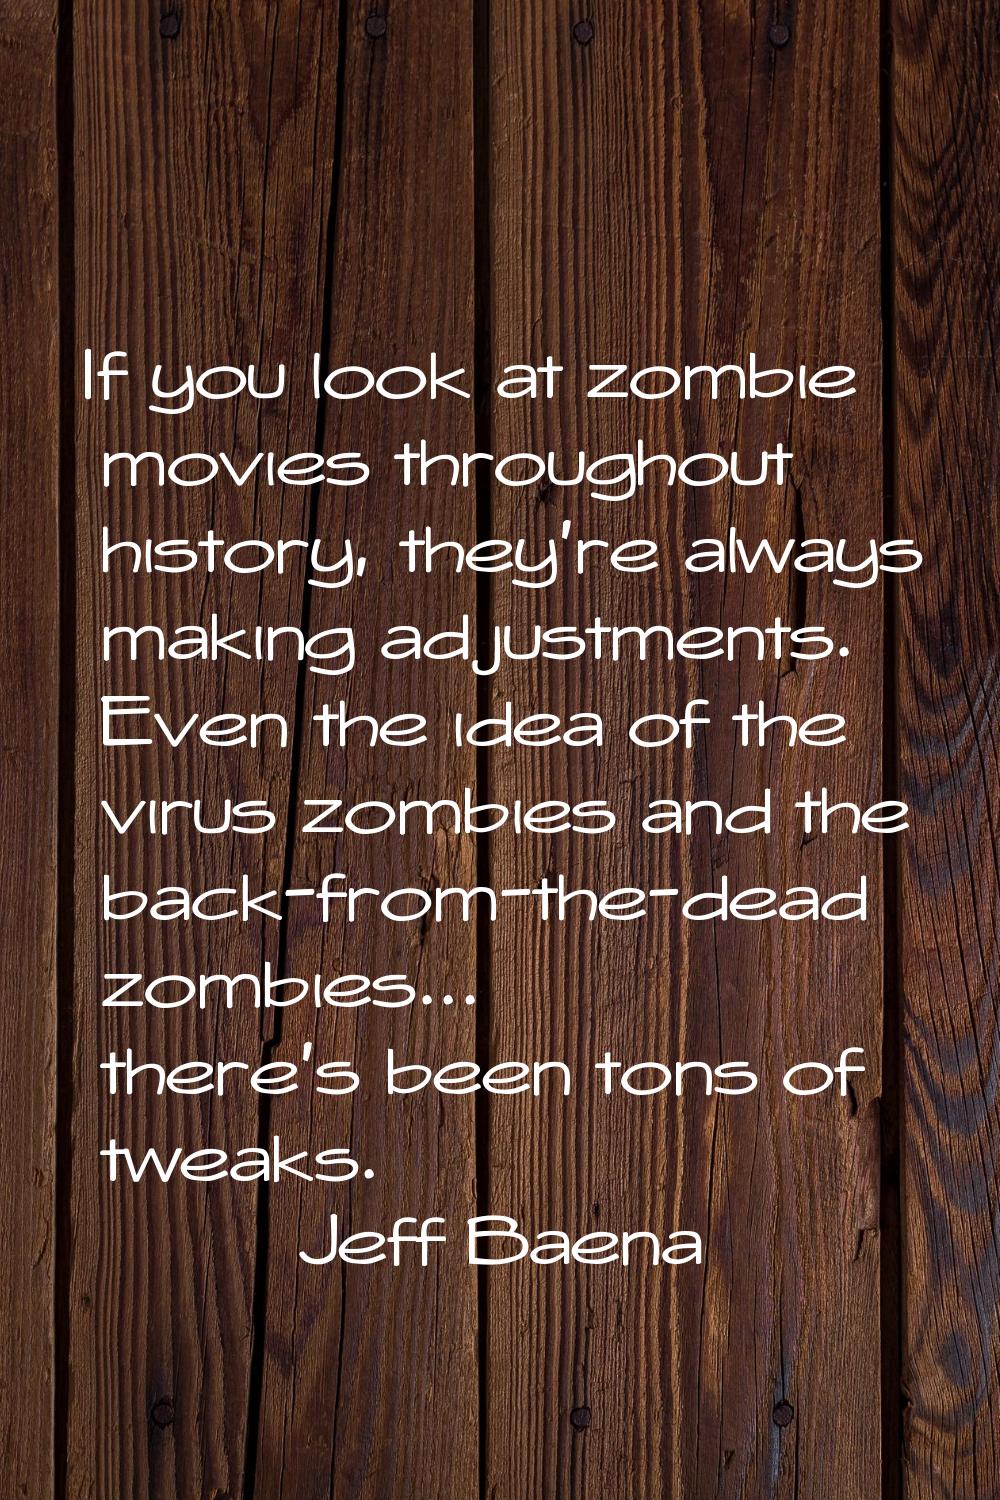 If you look at zombie movies throughout history, they're always making adjustments. Even the idea o